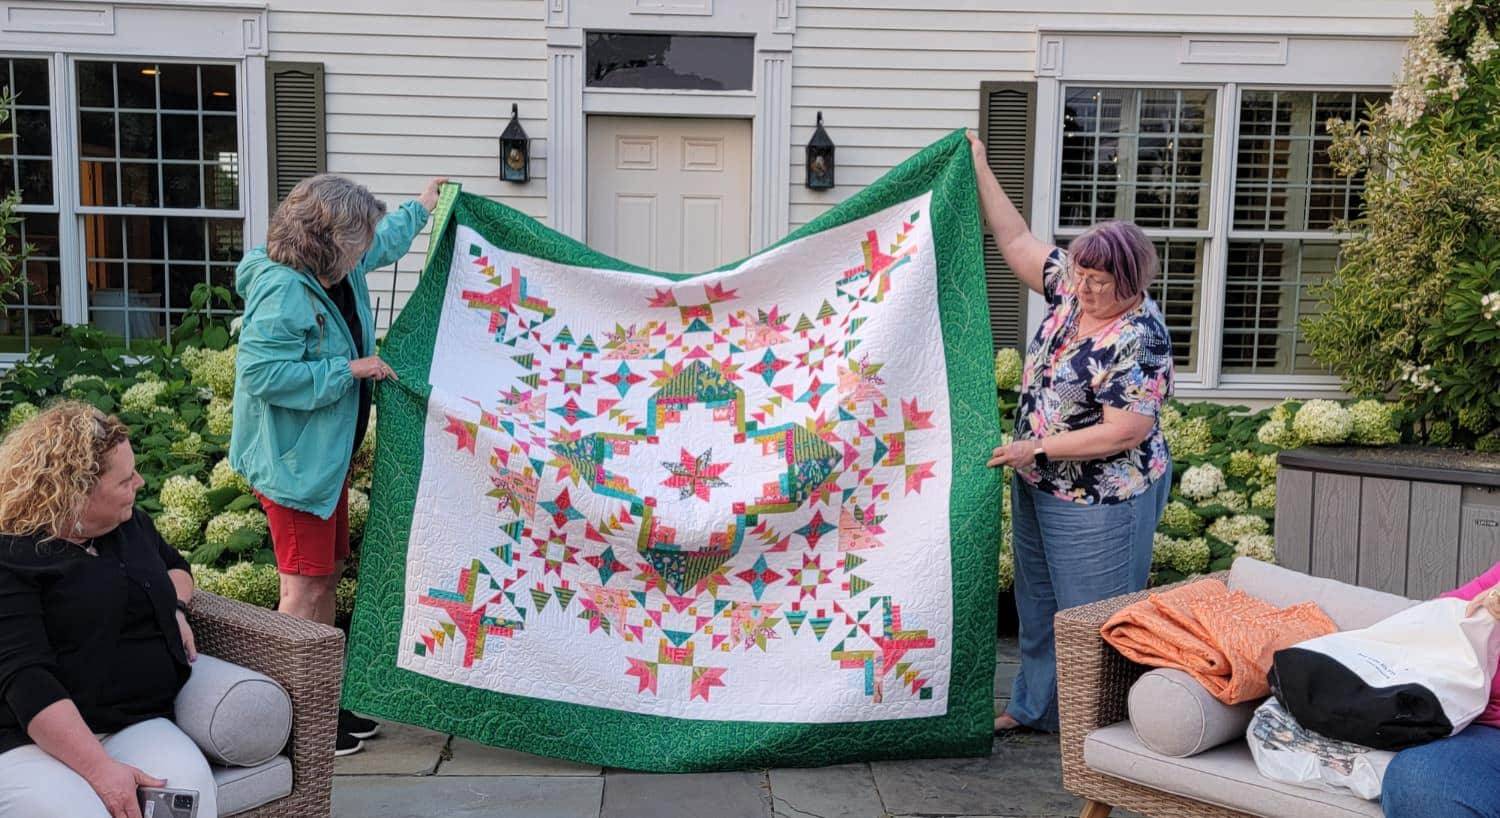 Two ladies standing and holding up a quilt with a design made up of white, green, blue, yellow, pink, and red fabric